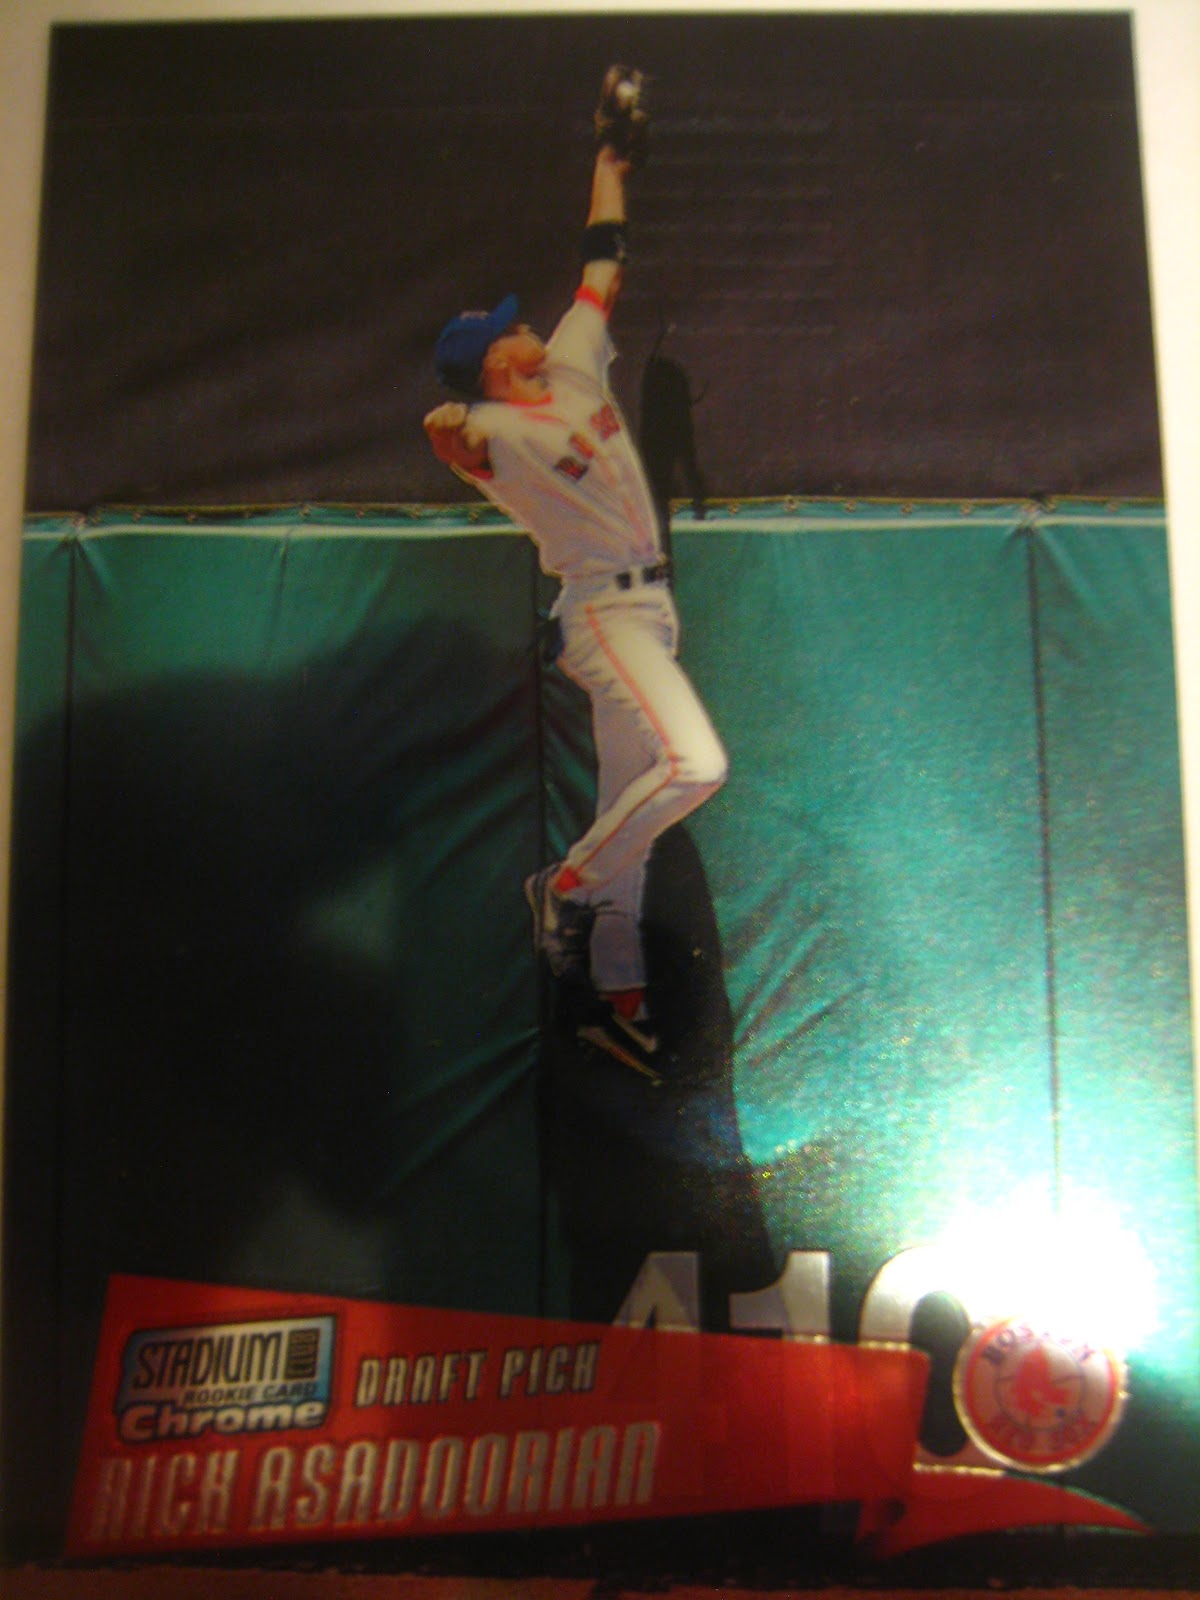 Baseball Cards Come to Life!: July 2014